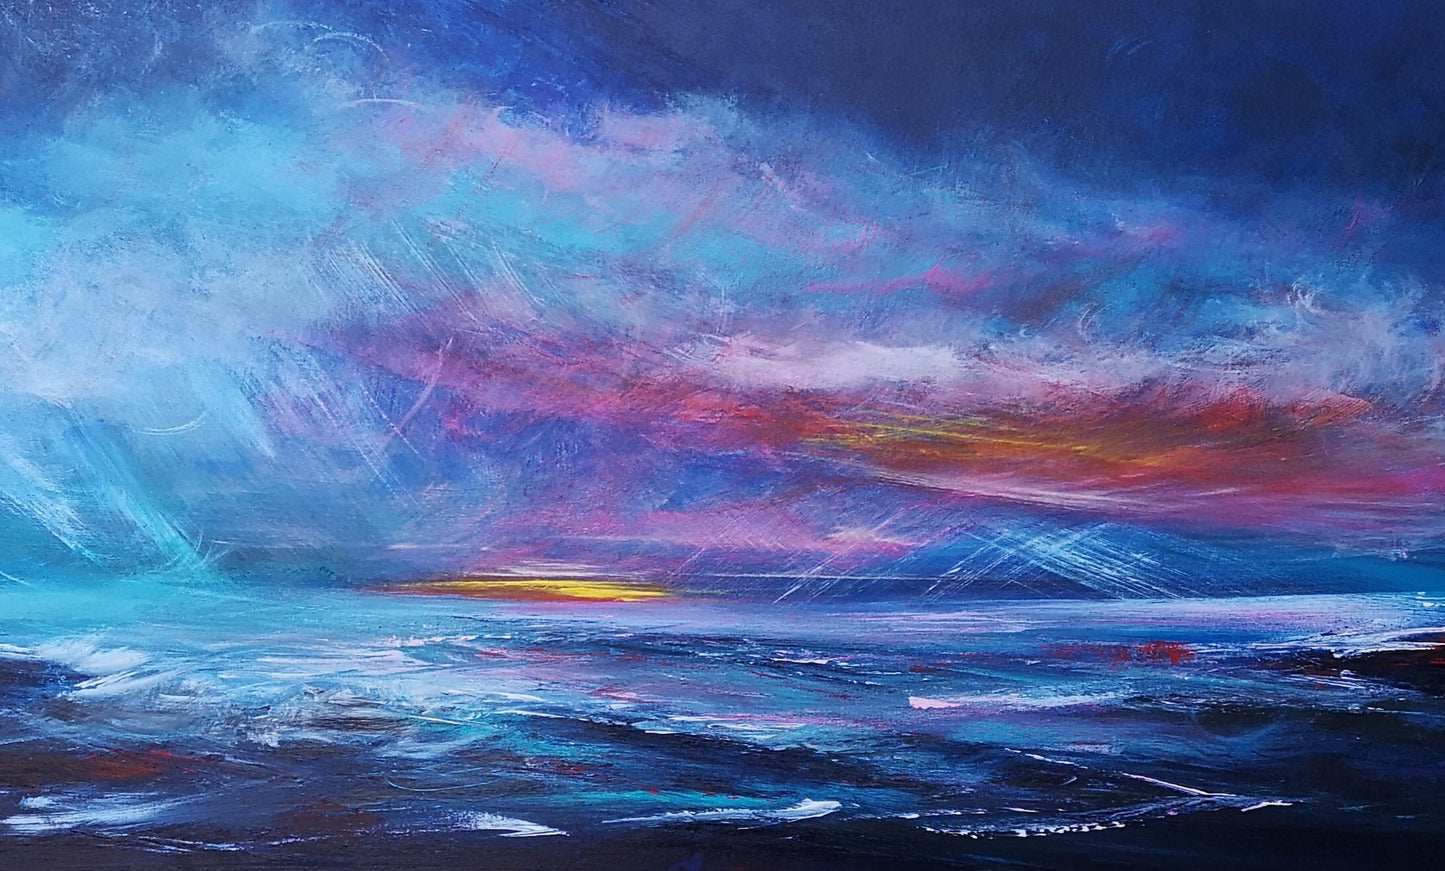 A Break in the Clouds, 120x50cm, Large, panoramic, emotional art, seascapes